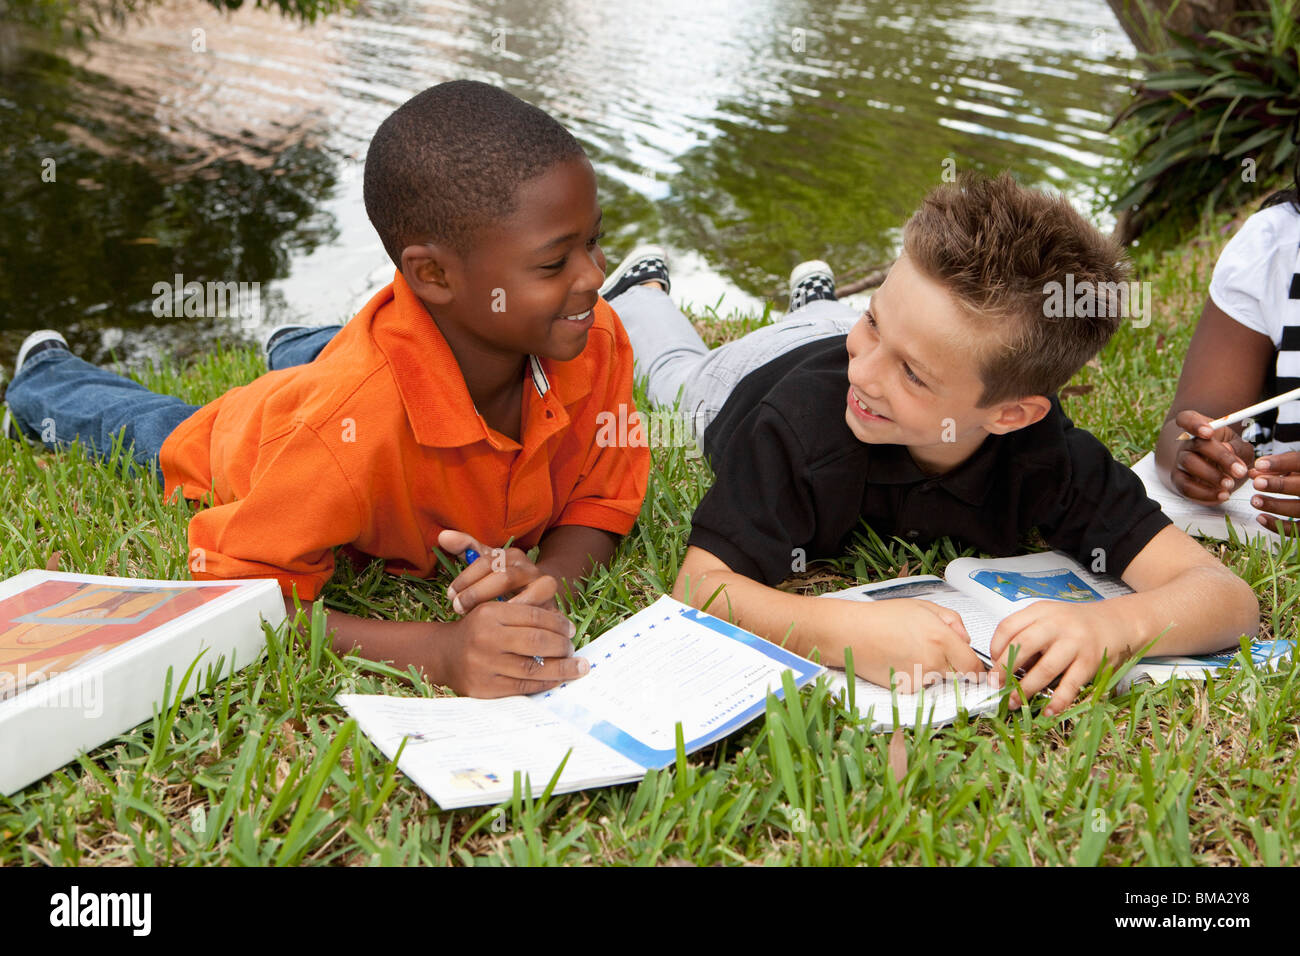 Fort Lauderdale, Florida, United States Of America; Two Boys Doing School Work In The Park Stock Photo